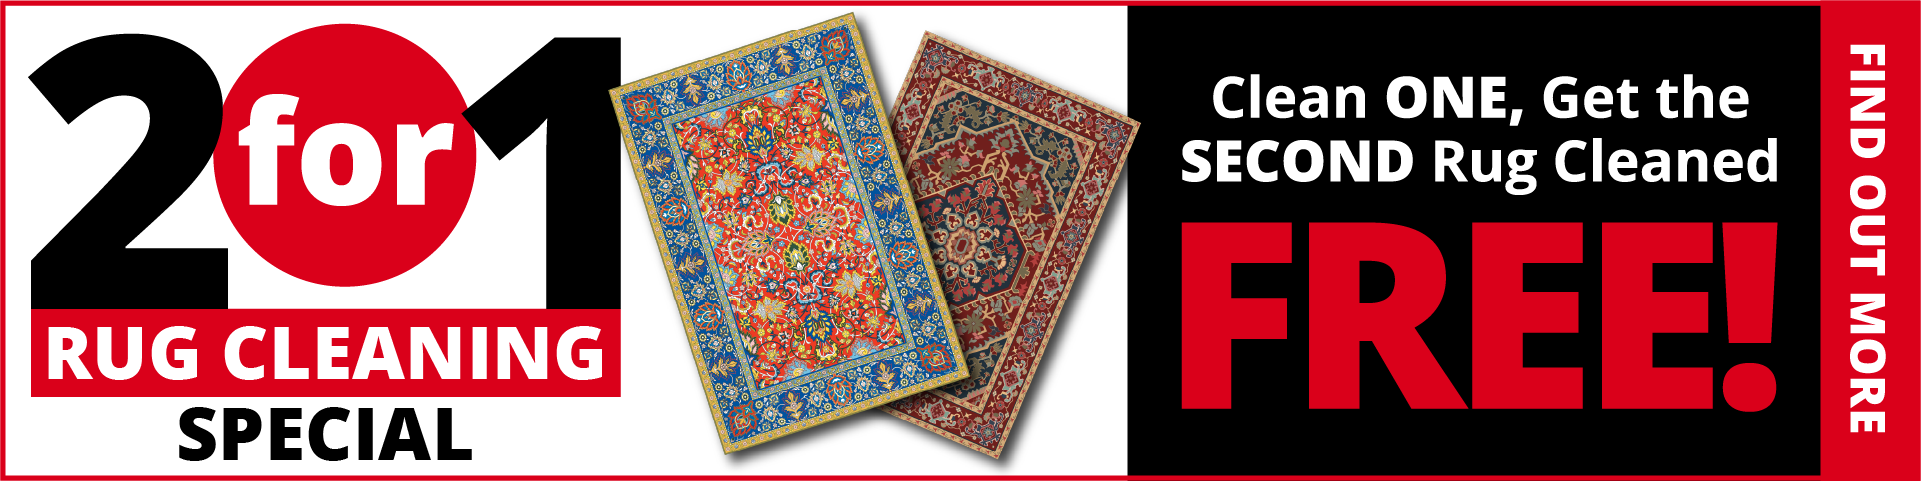 Get one rug cleaned at a regular price at our new shop and get a second rug cleaned free!